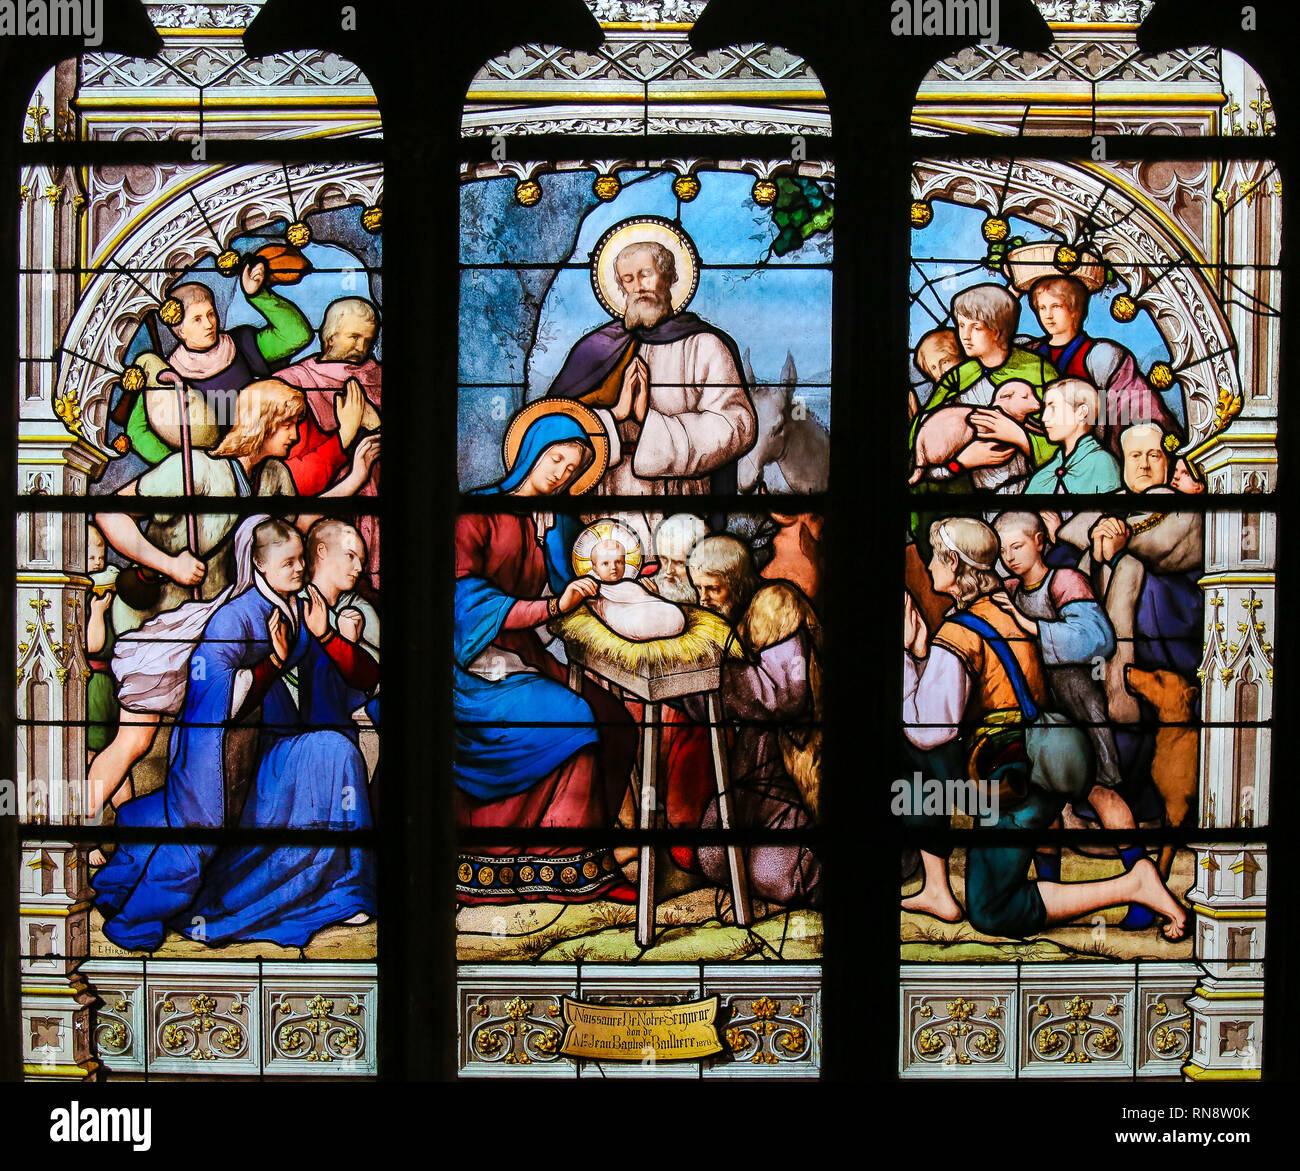 Stained Glass in the Church of Saint Severin, Latin Quarter, Paris, France, depicting a Nativity Scene at Christmas Stock Photo